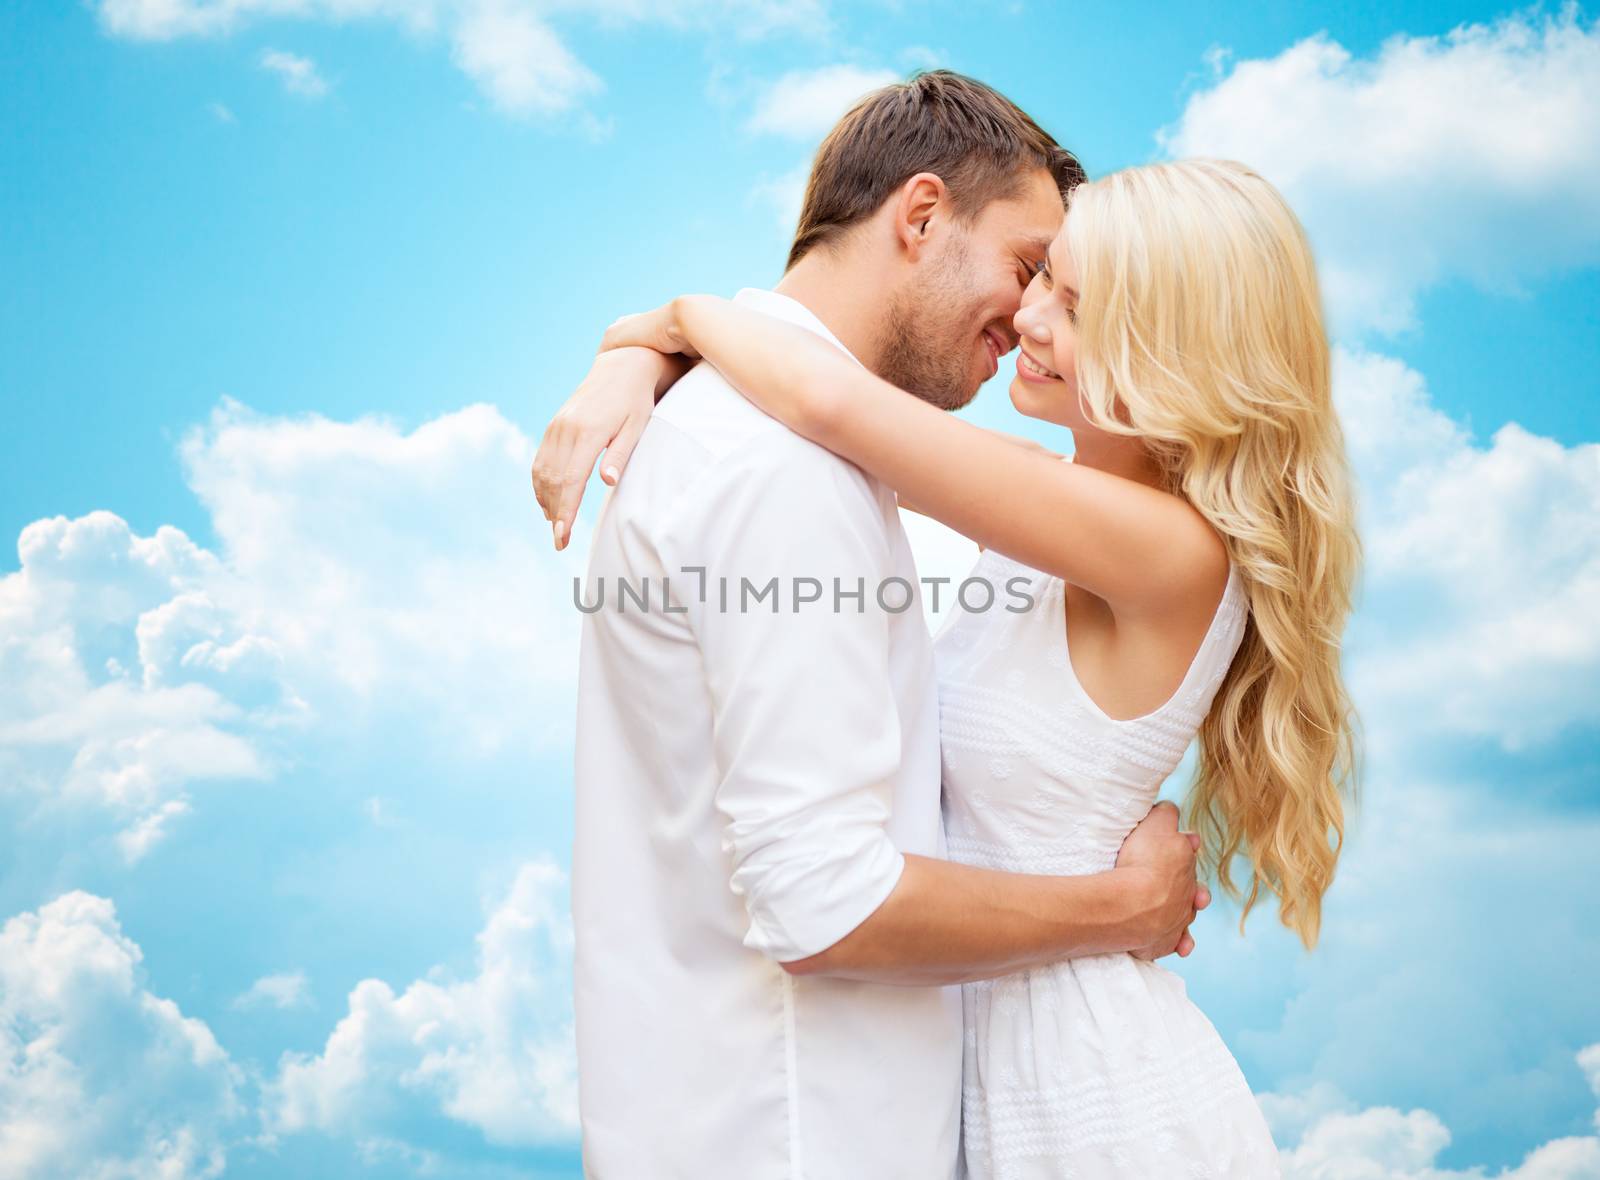 summer holidays, people, love and dating concept - happy couple hugging over blue sky and white clouds background